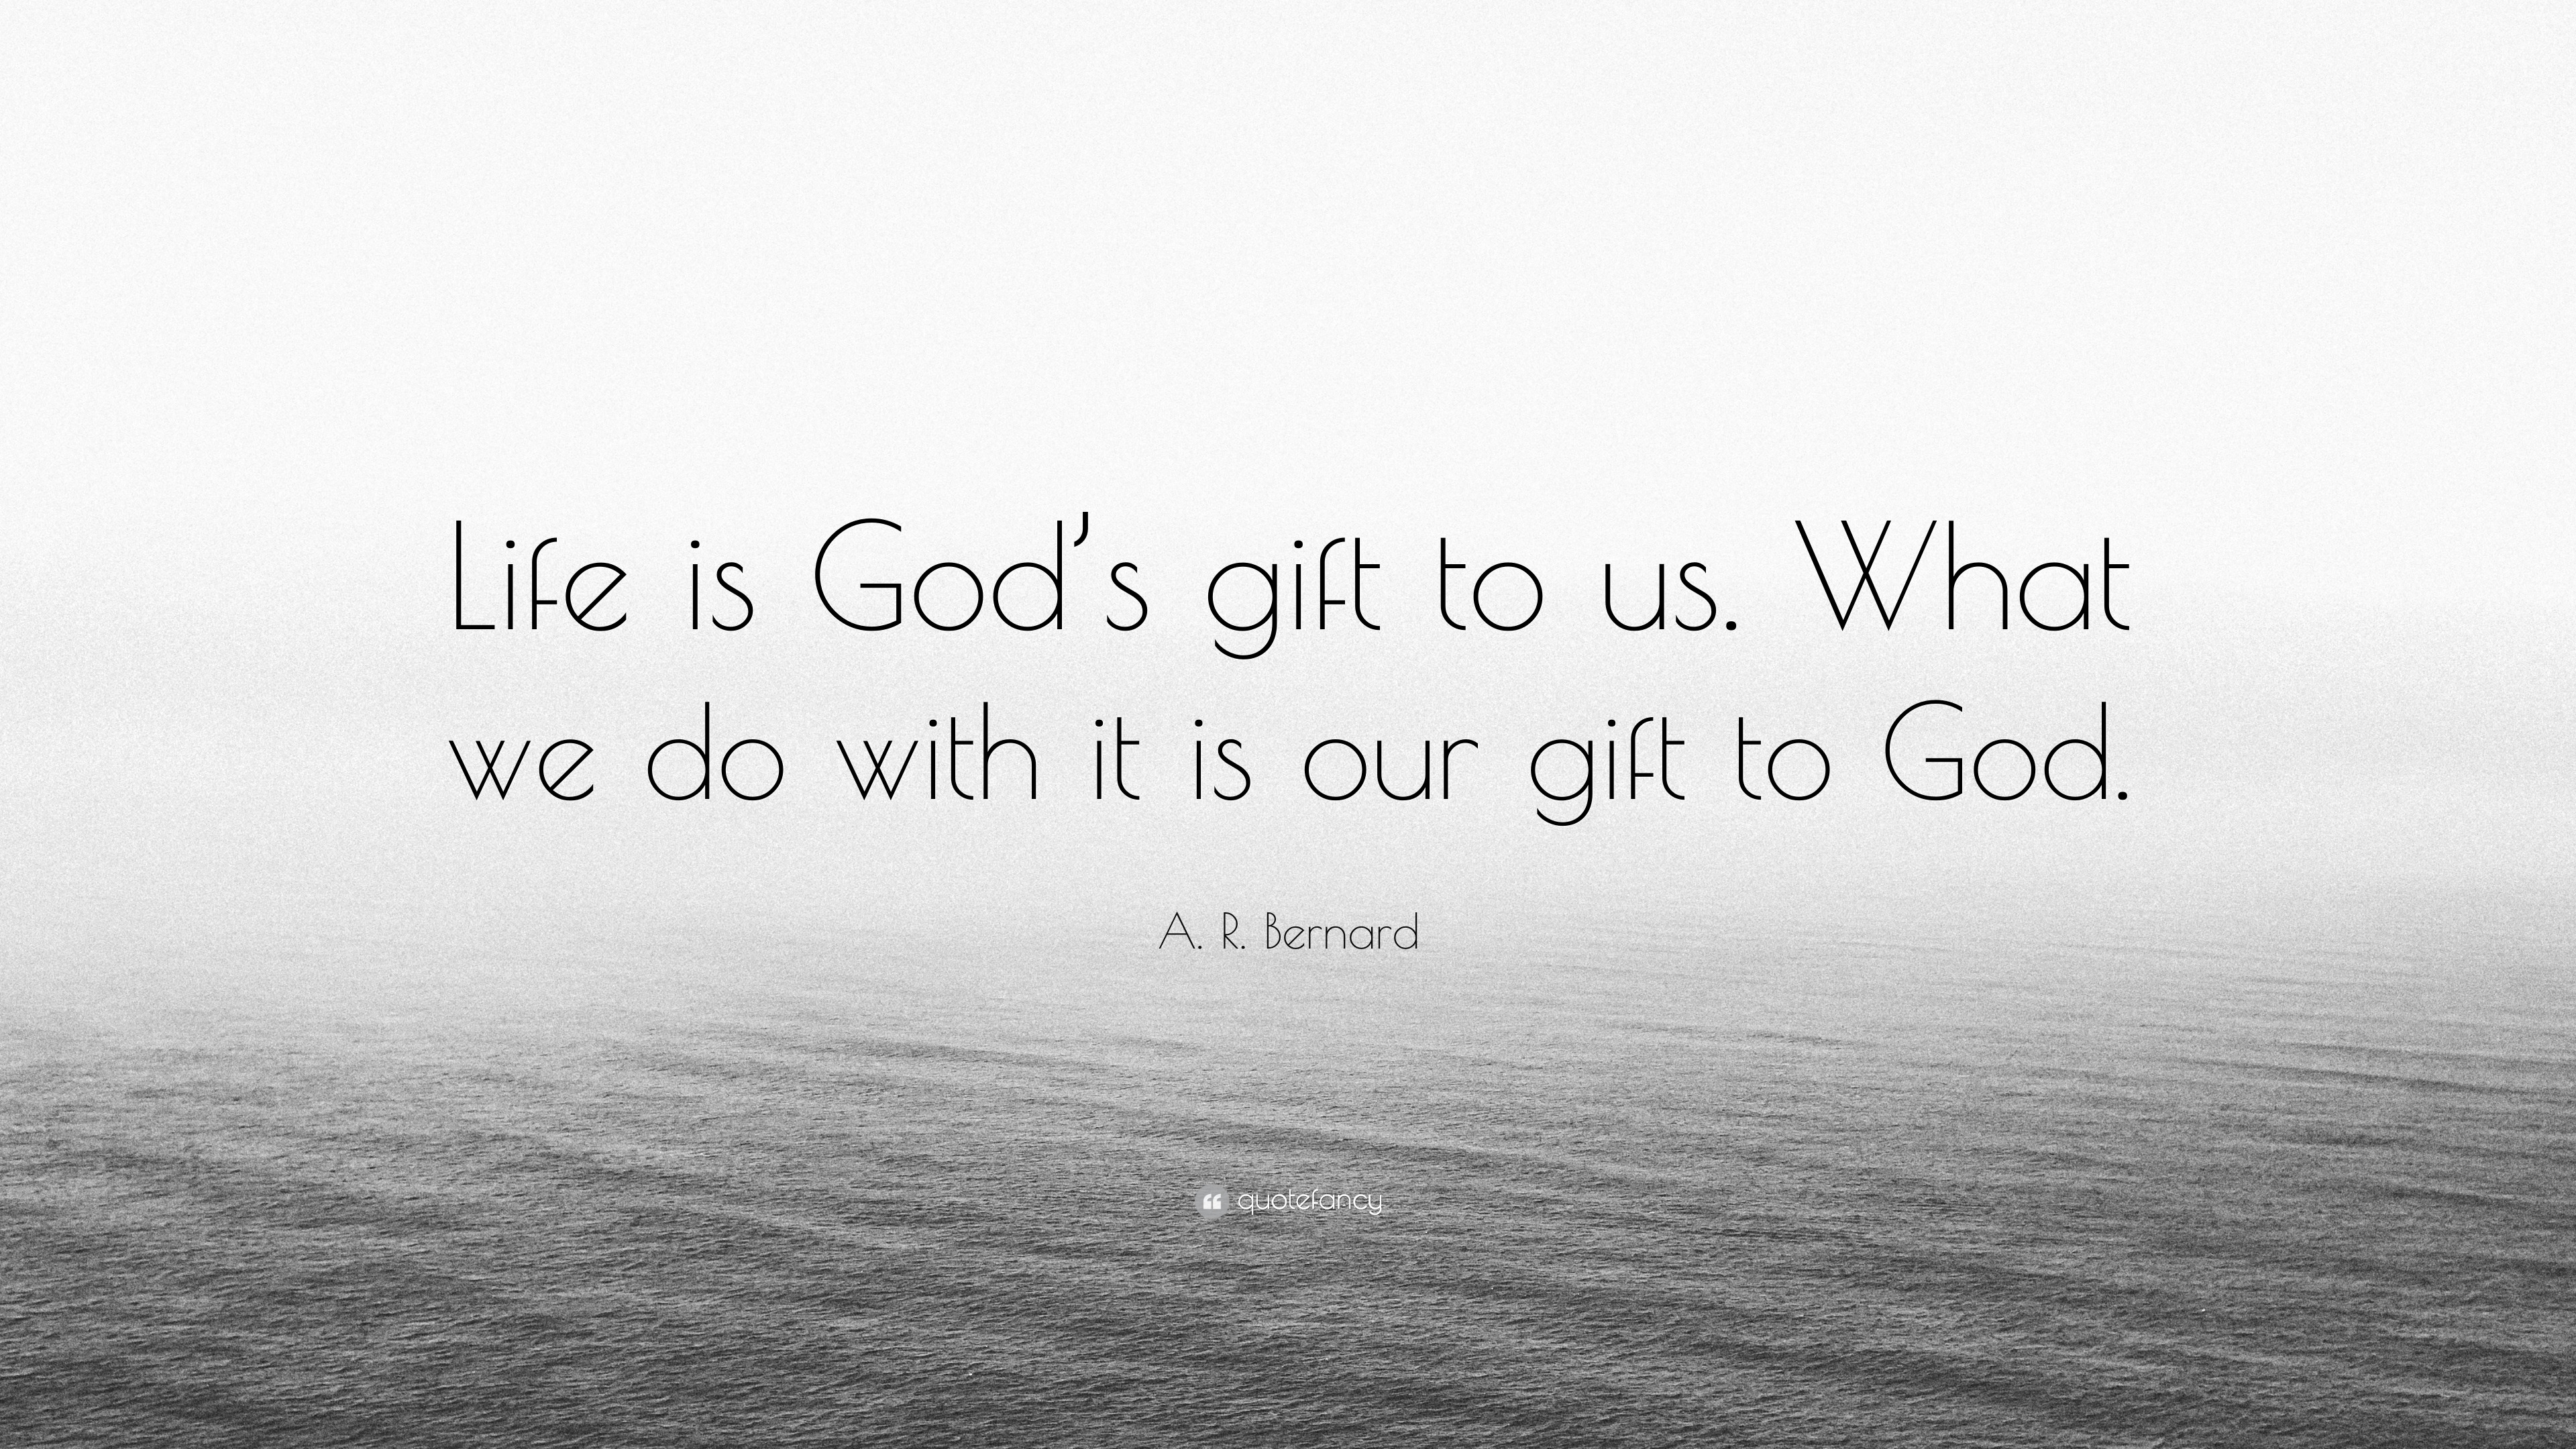 Life is a gift... - Spiritual Quotes & Beautiful Photographs | Facebook